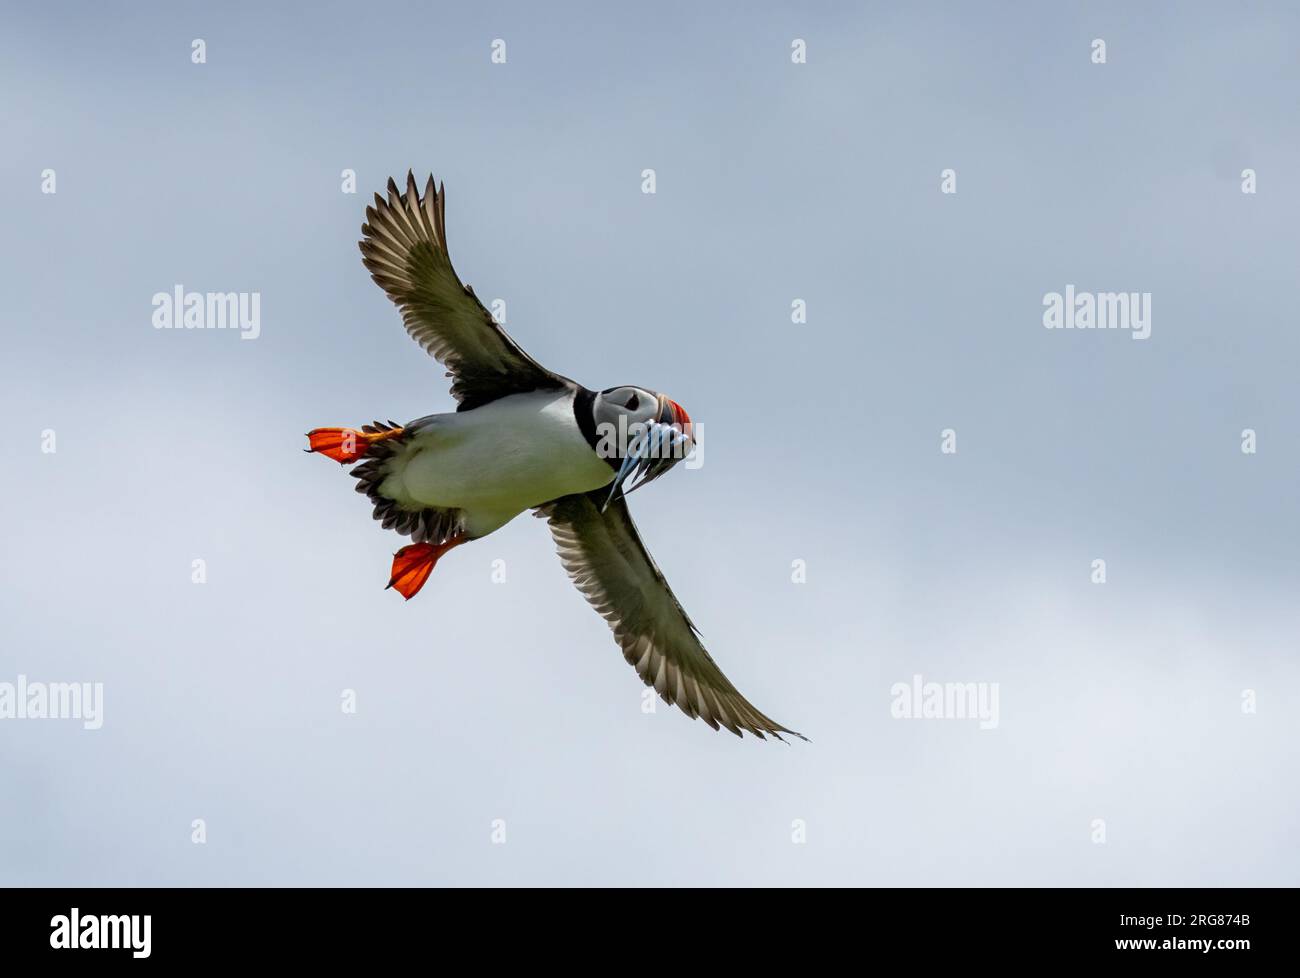 Cute Puffin flying in the blue sky with no clouds with sand eels in its beak Stock Photo